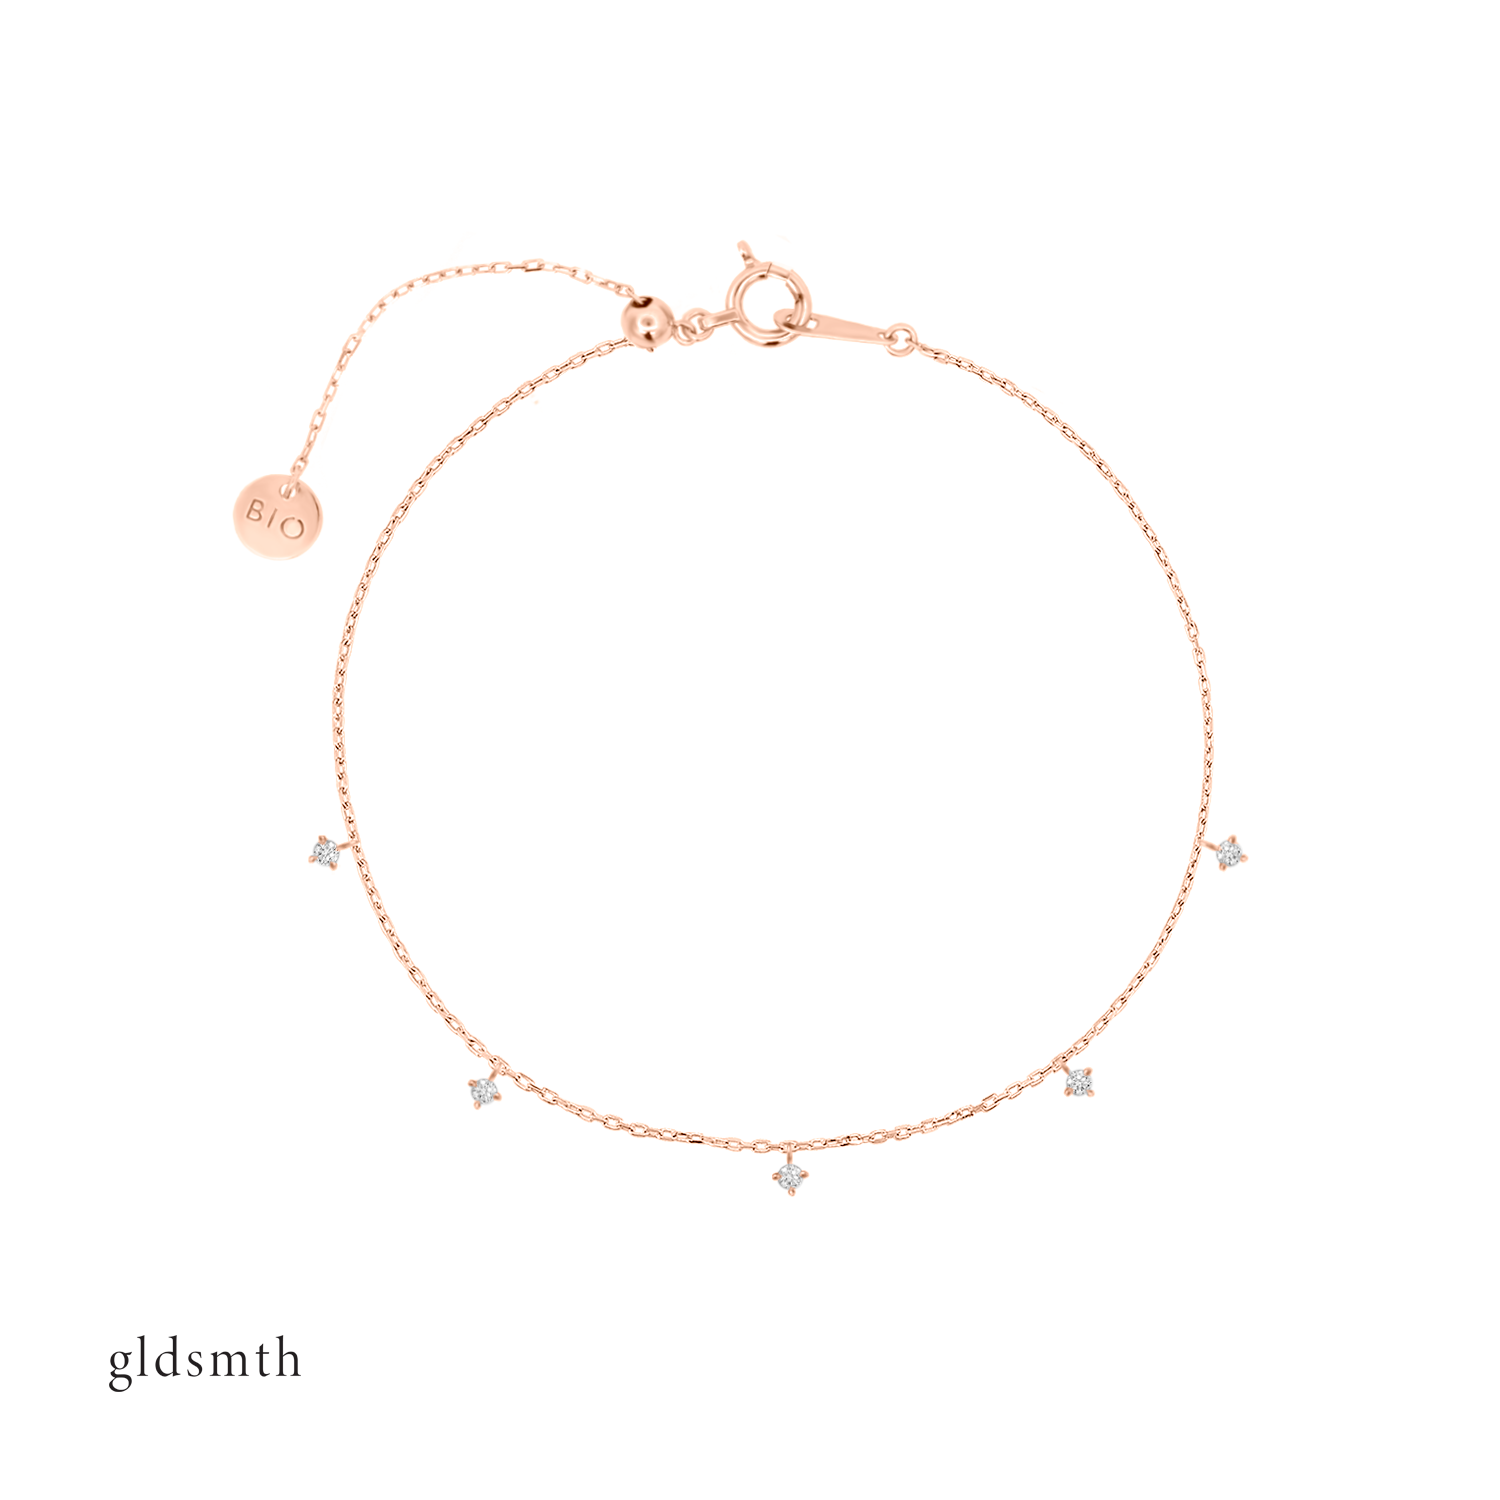 Graceful and delicate hand crafted 10k solid rose gold bracelet with conflict-free diamonds.